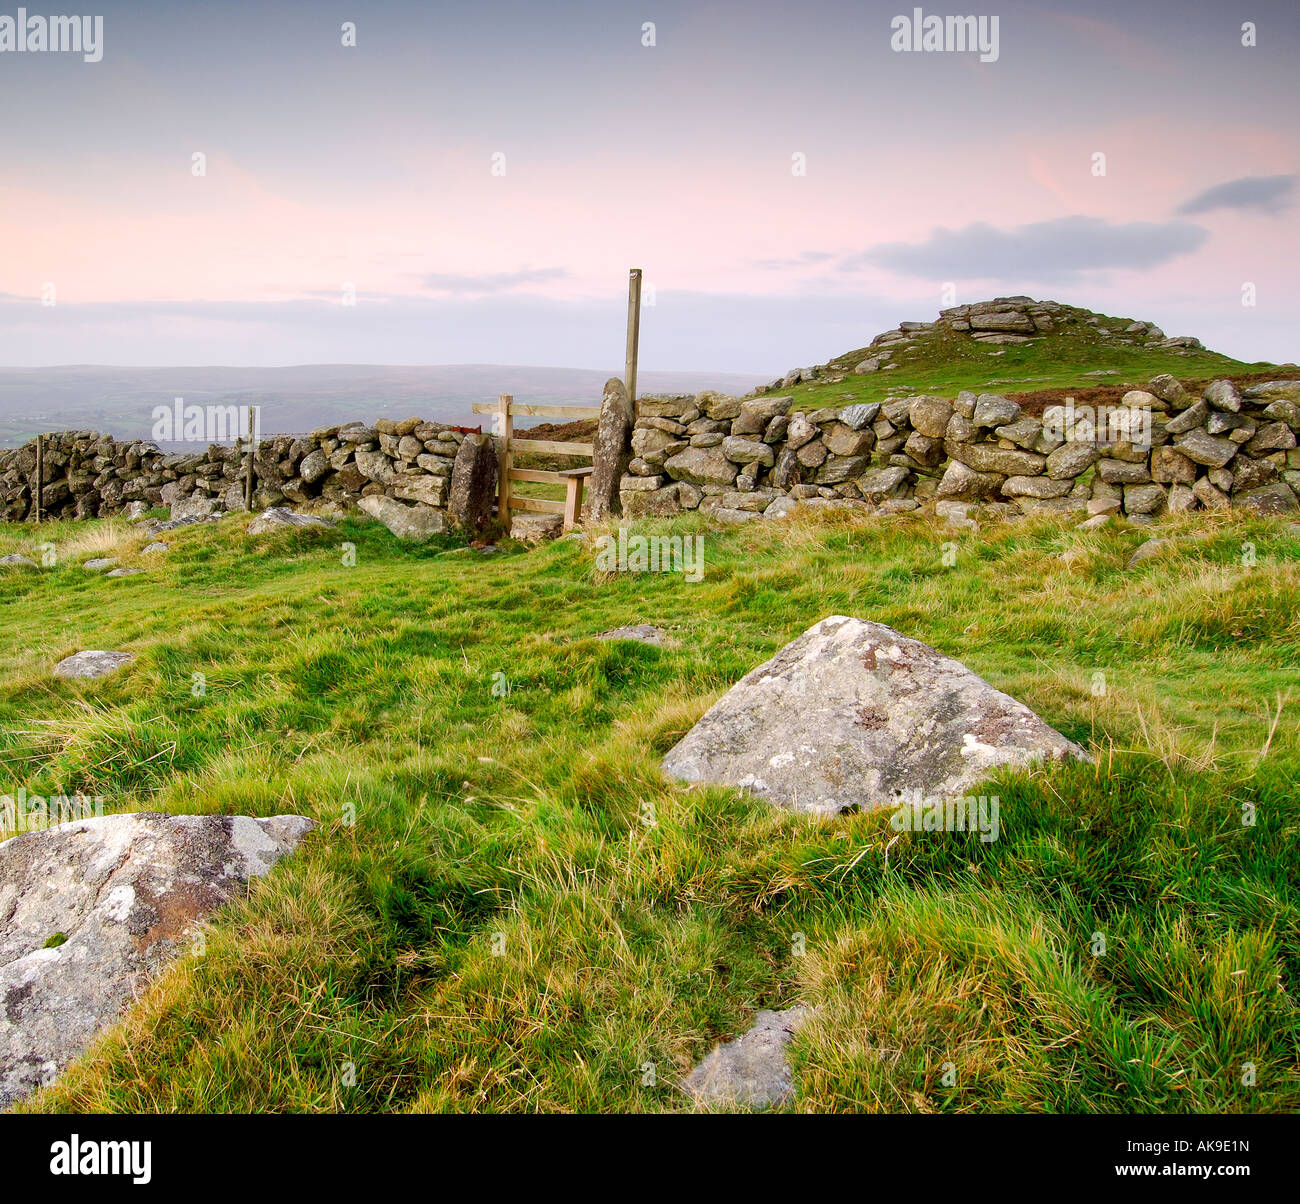 Just before dawn at Buckland Beacon on Dartmoor with a dry stone wall and wooden stile Stock Photo